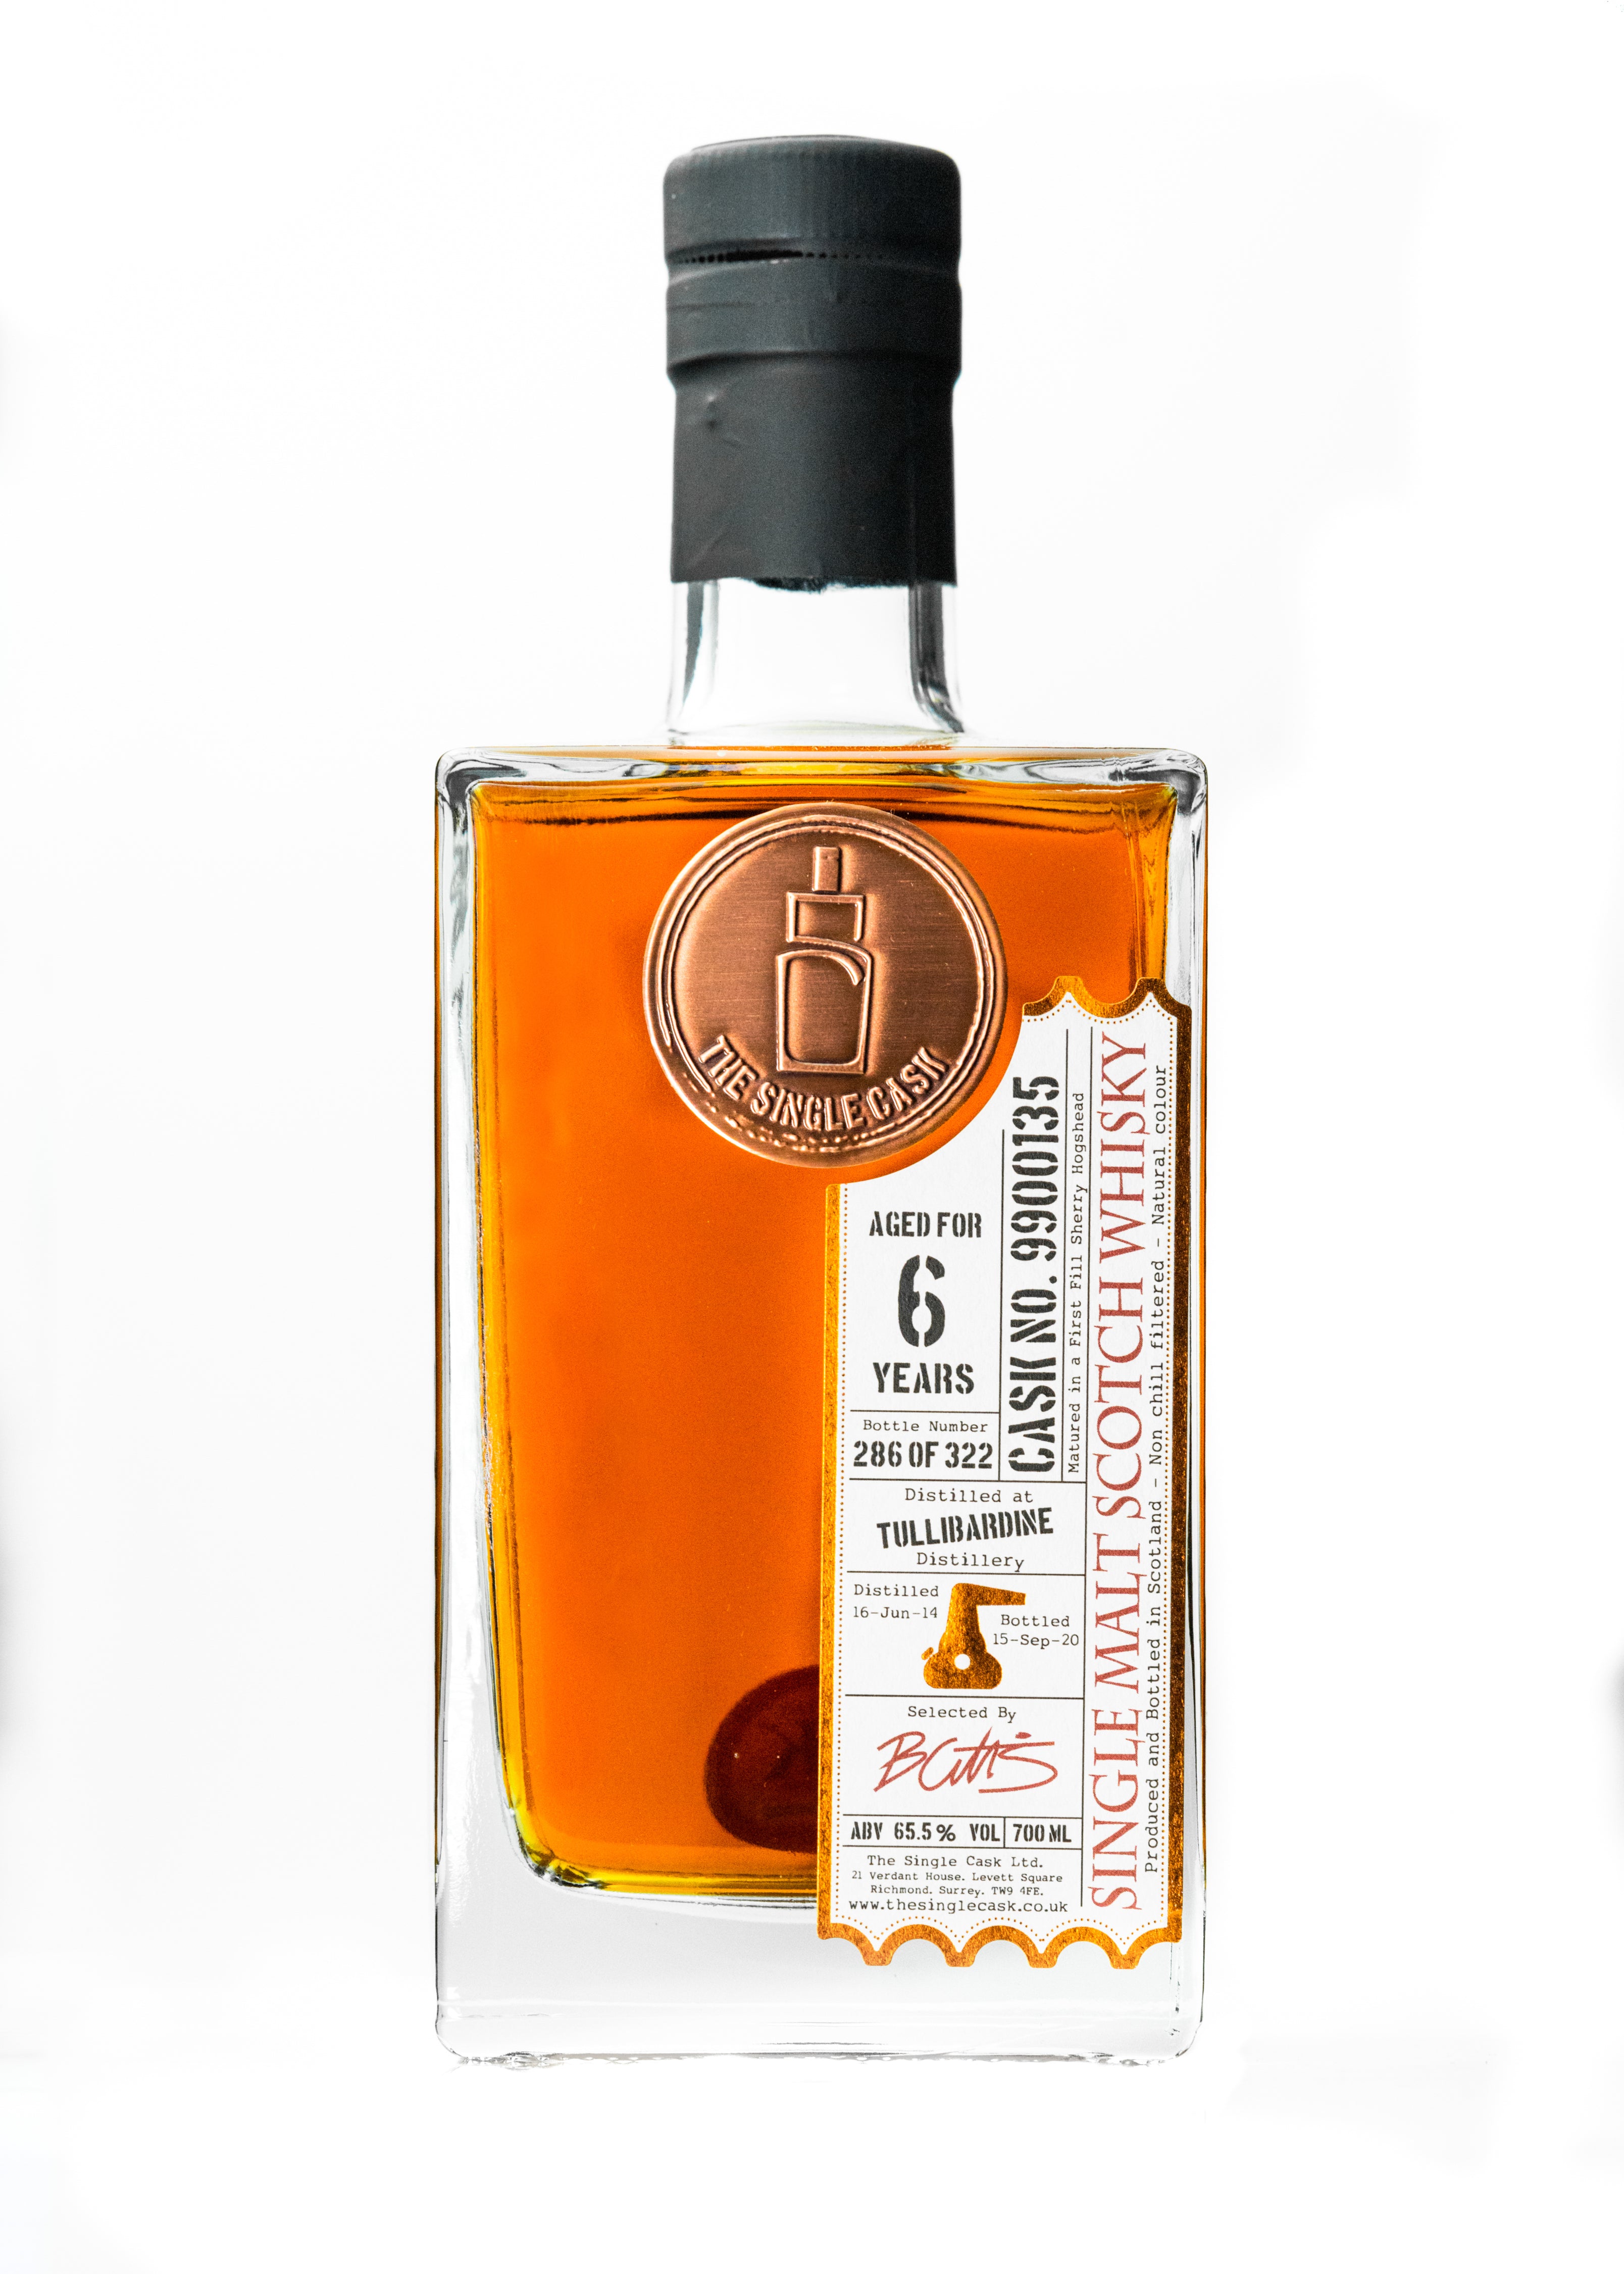 Tullibardine 6 years old scotch whisky by The Single Cask